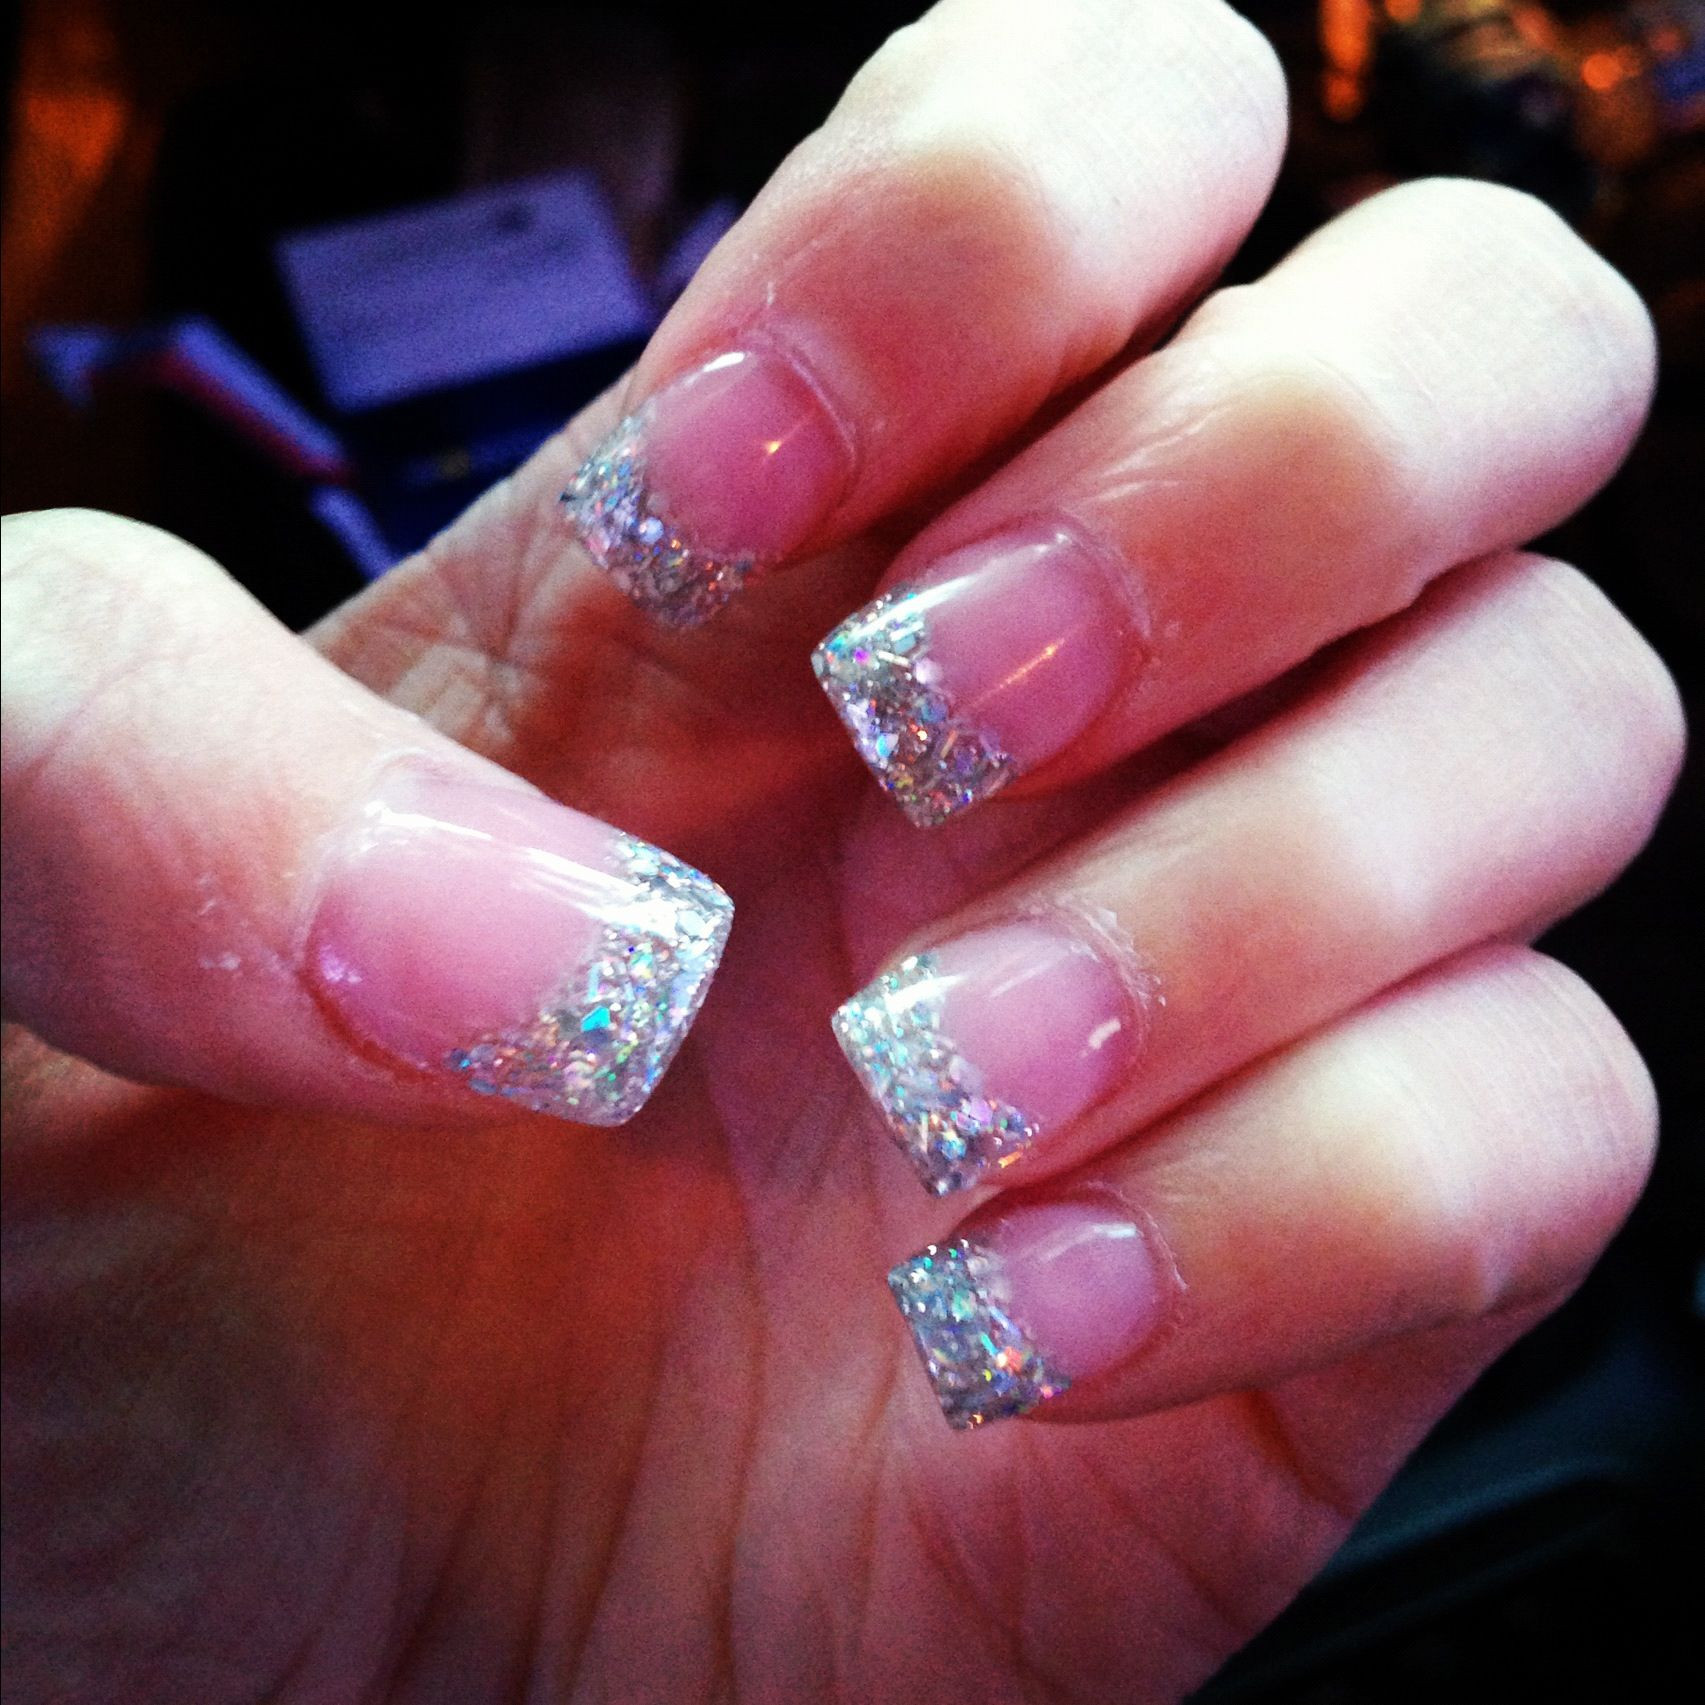 Red Glitter Tips Nails
 Pink and white acrylic with glitter tips